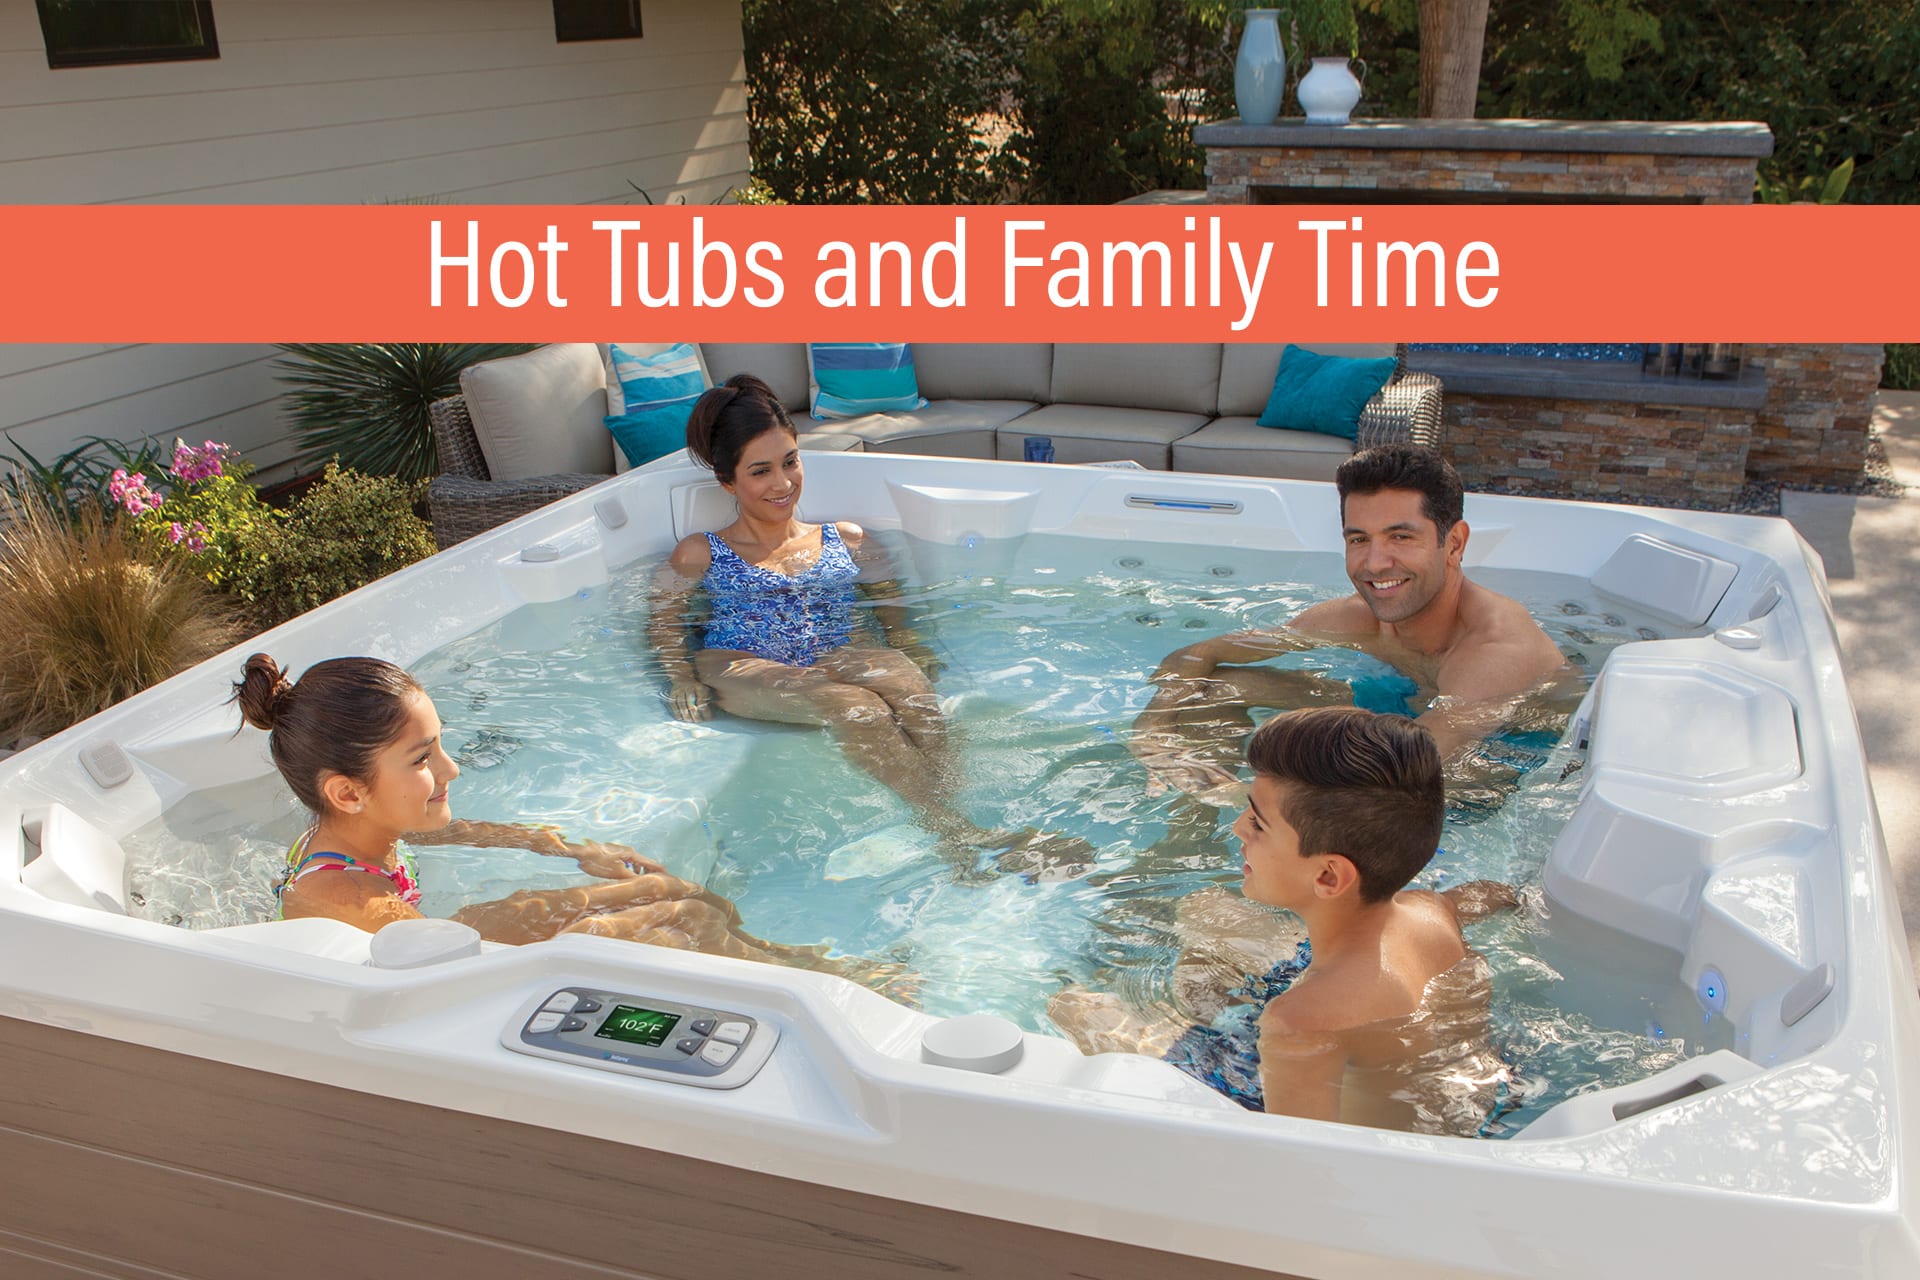 Hot Tubs and Family Time